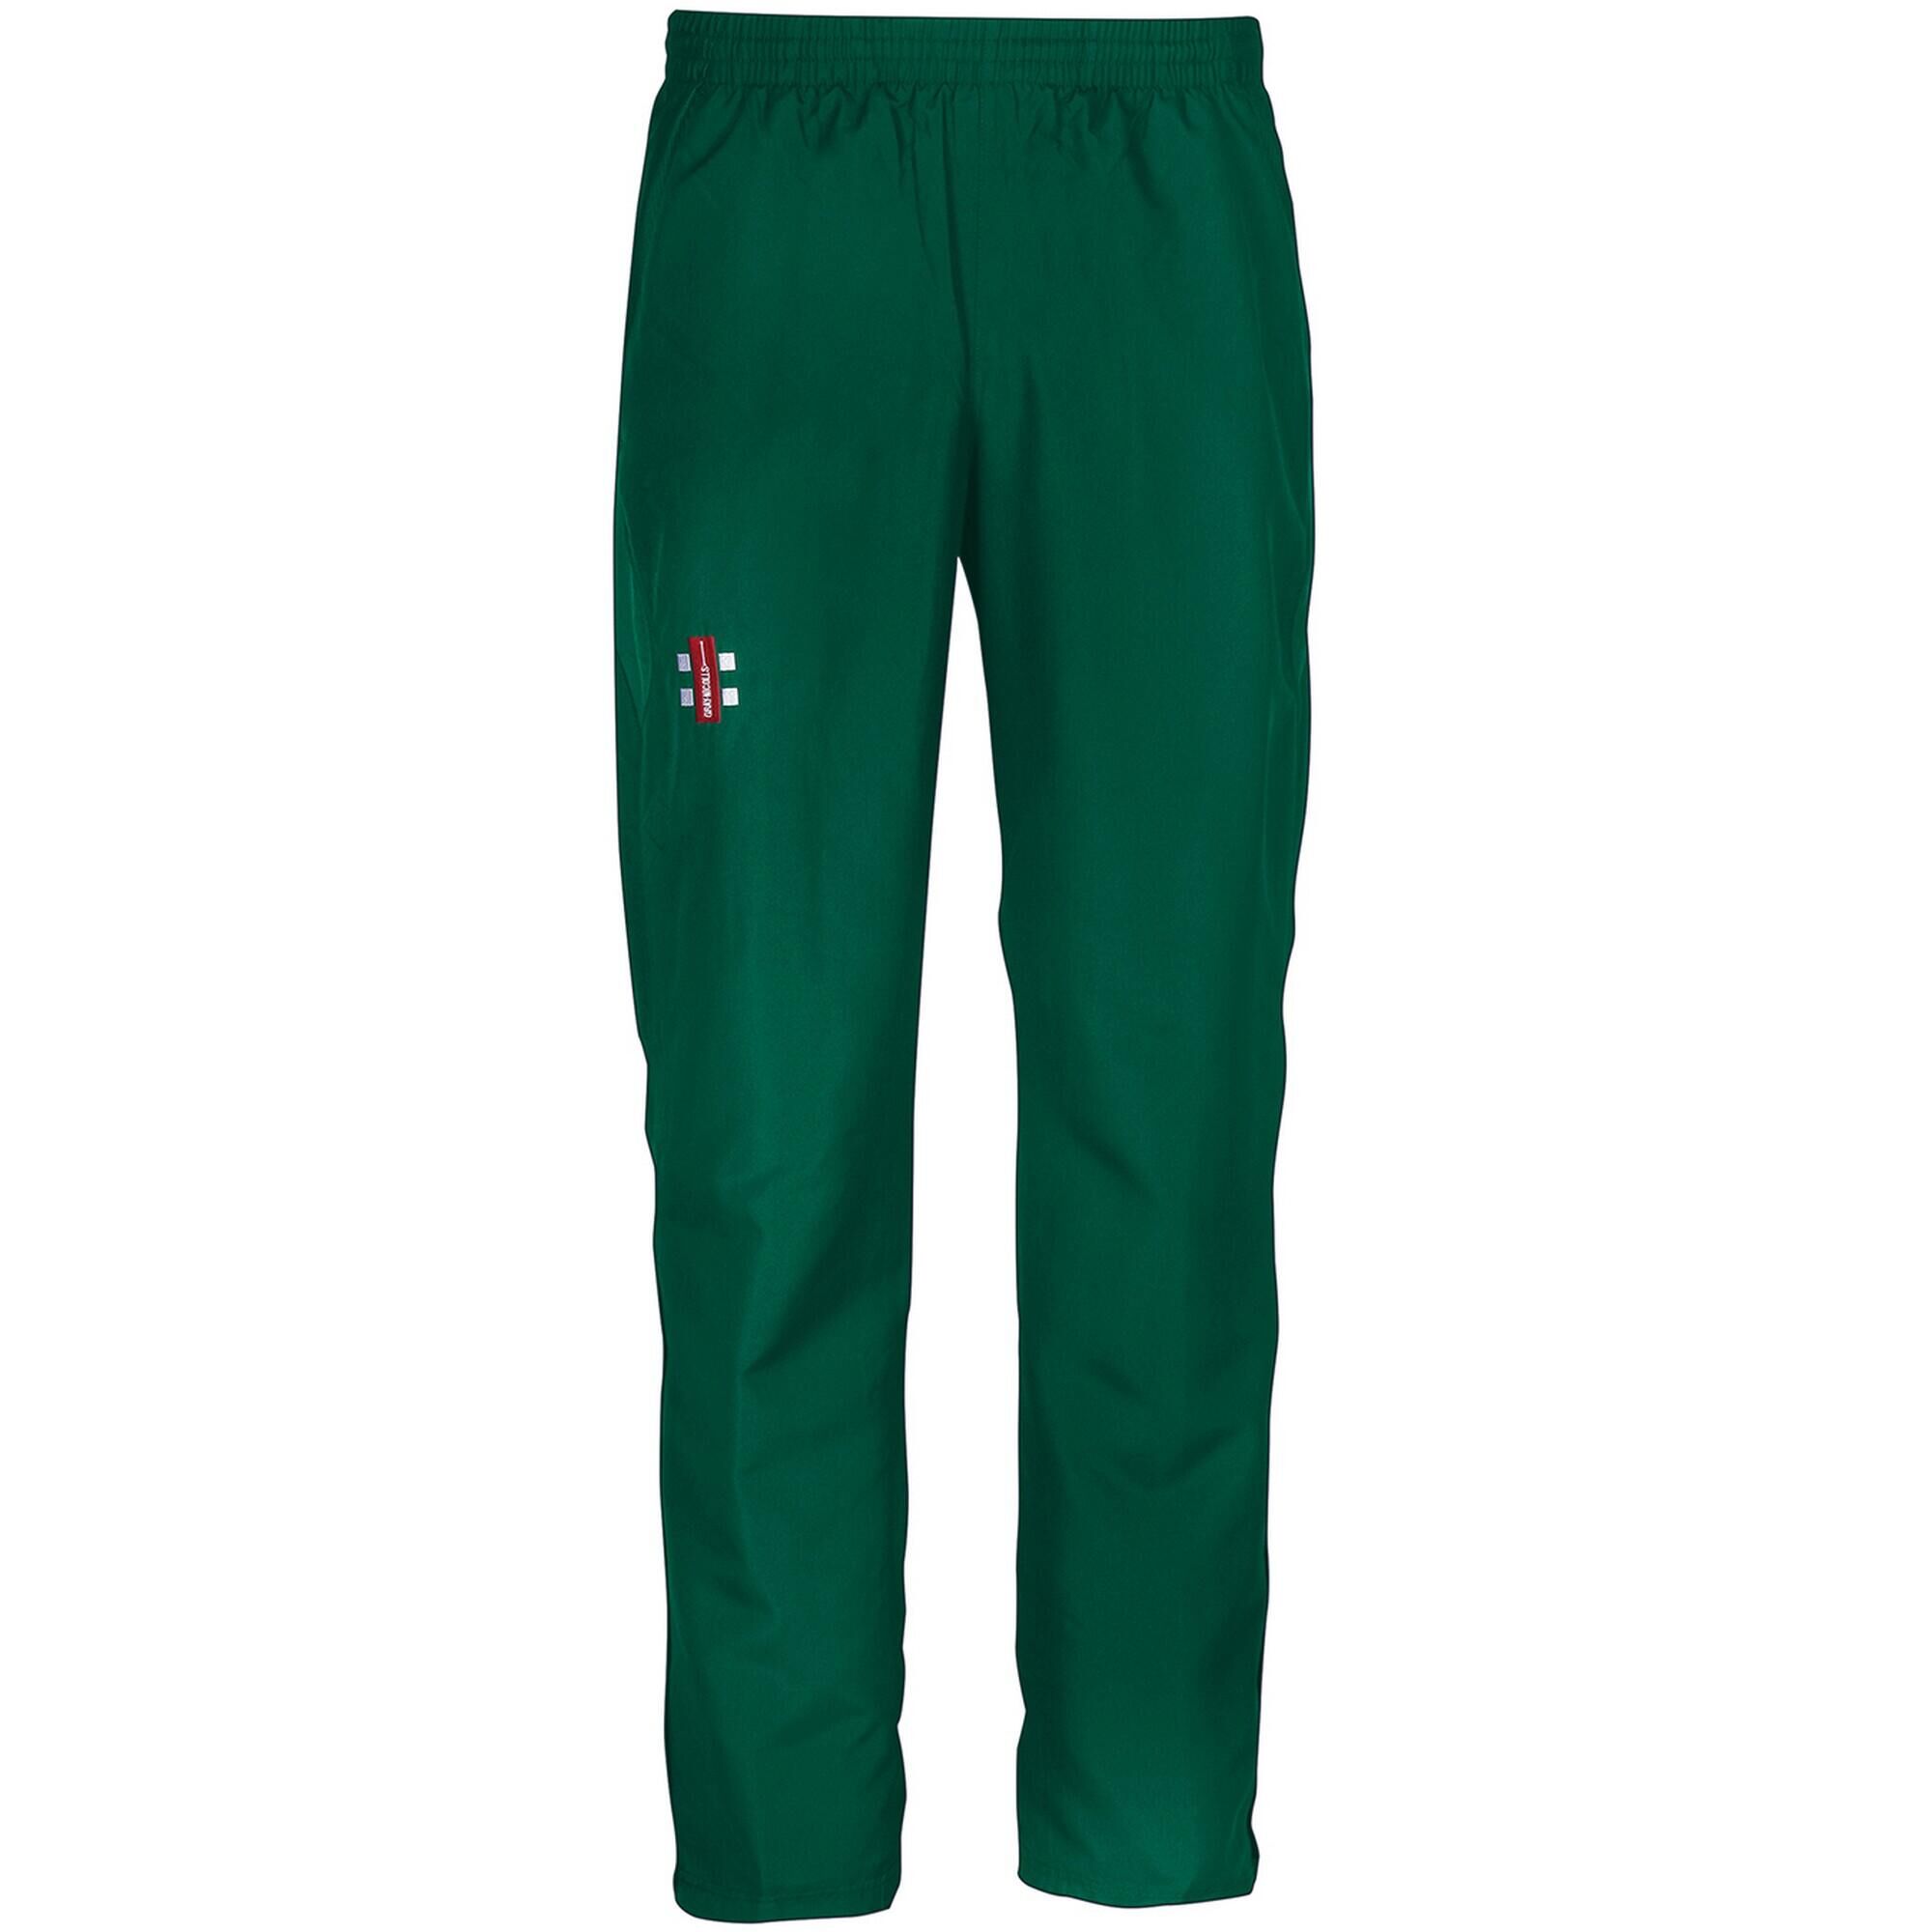 GRAY-NICOLLS Adults Unisex Storm Track Trousers (Green)